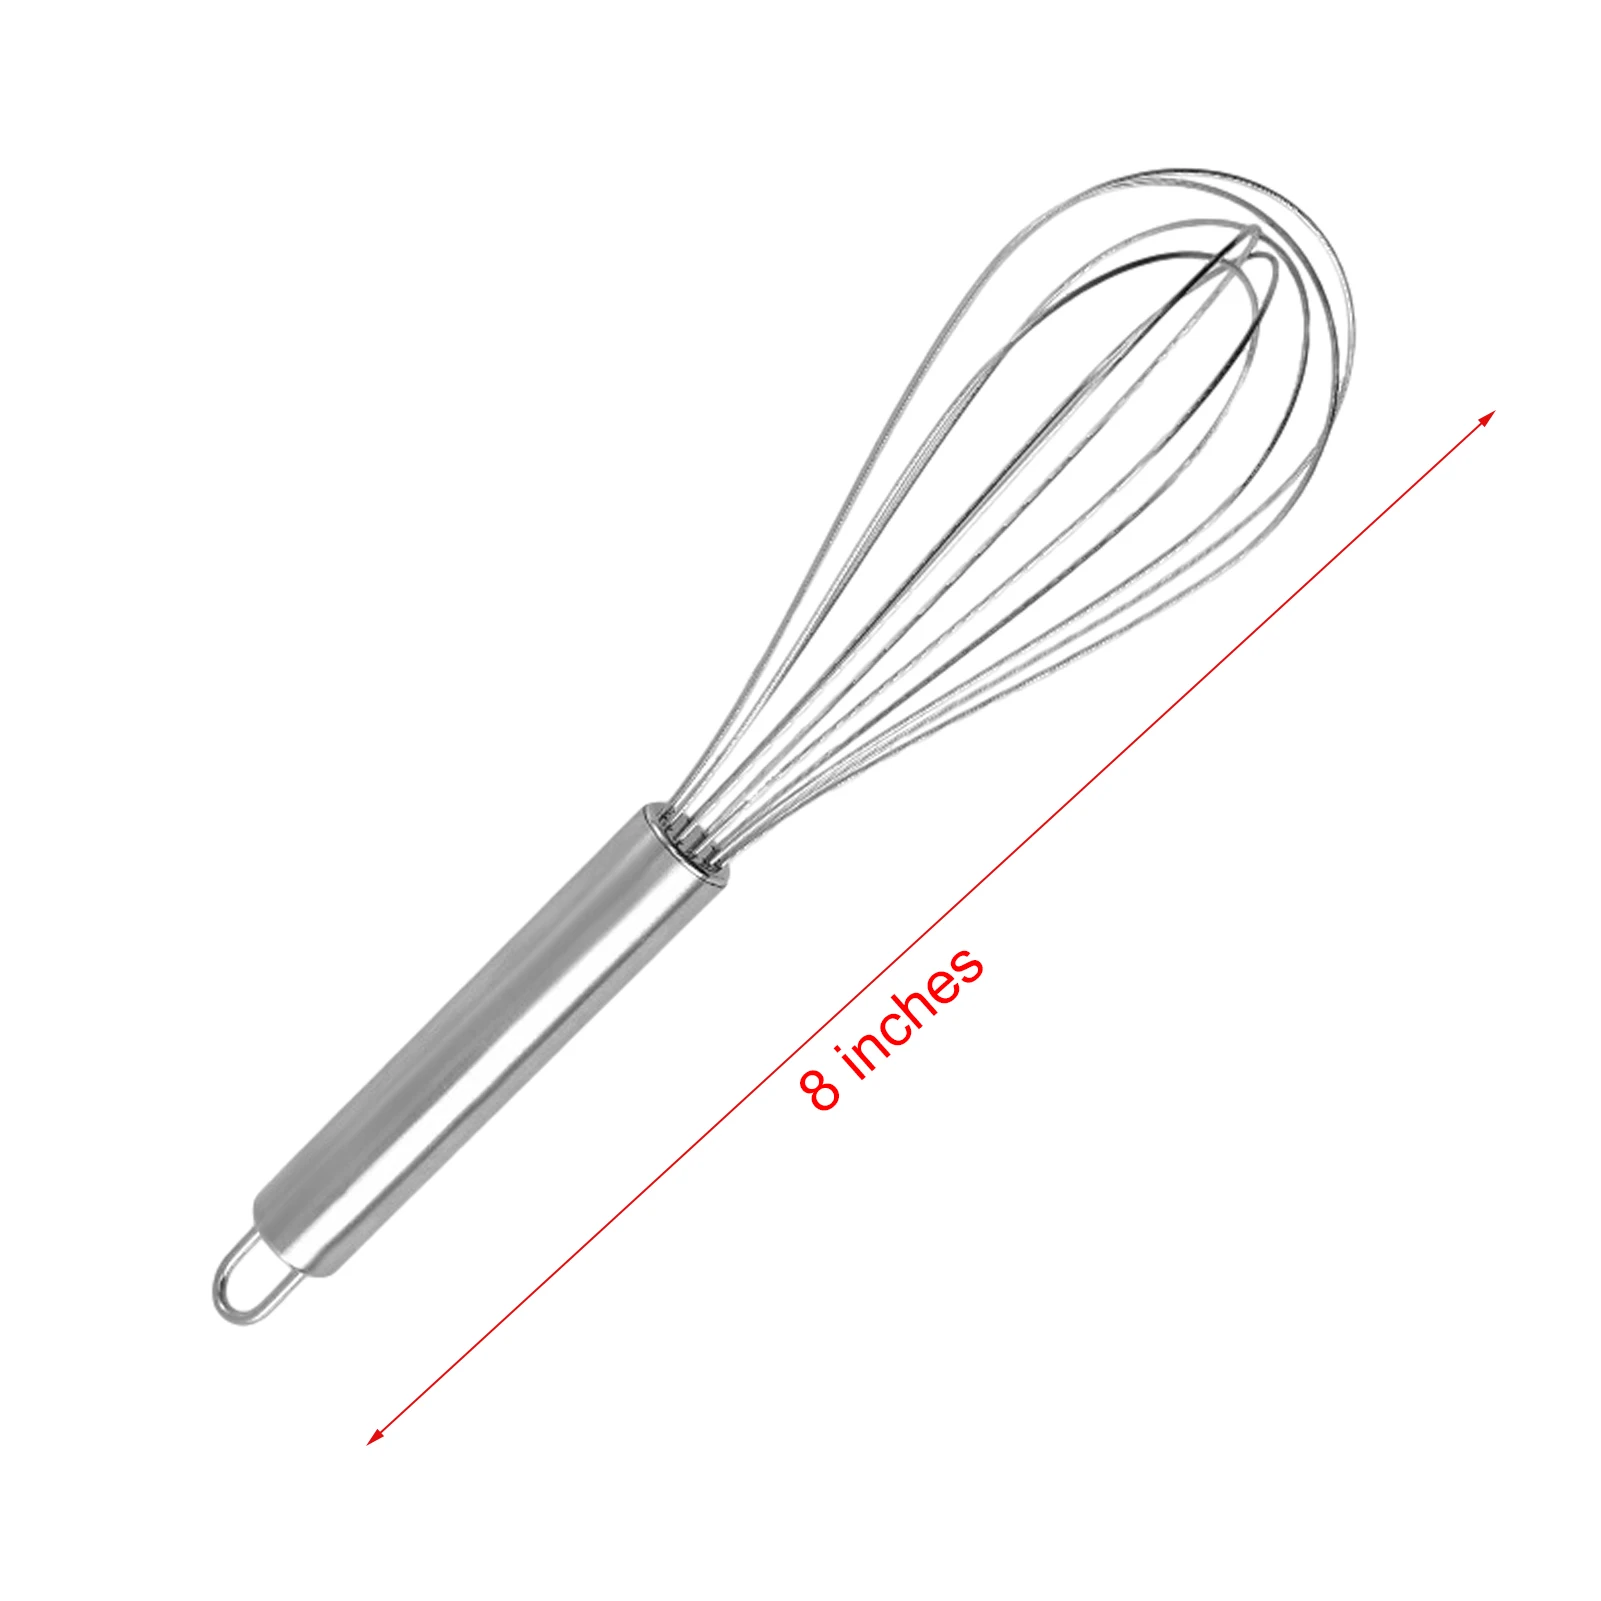 

Stainless Steel Whisks Wire Set For Cooking Blending Beating Manual Batter Egg Mixer Creamer Utensils Kitchen Accessories Gadget